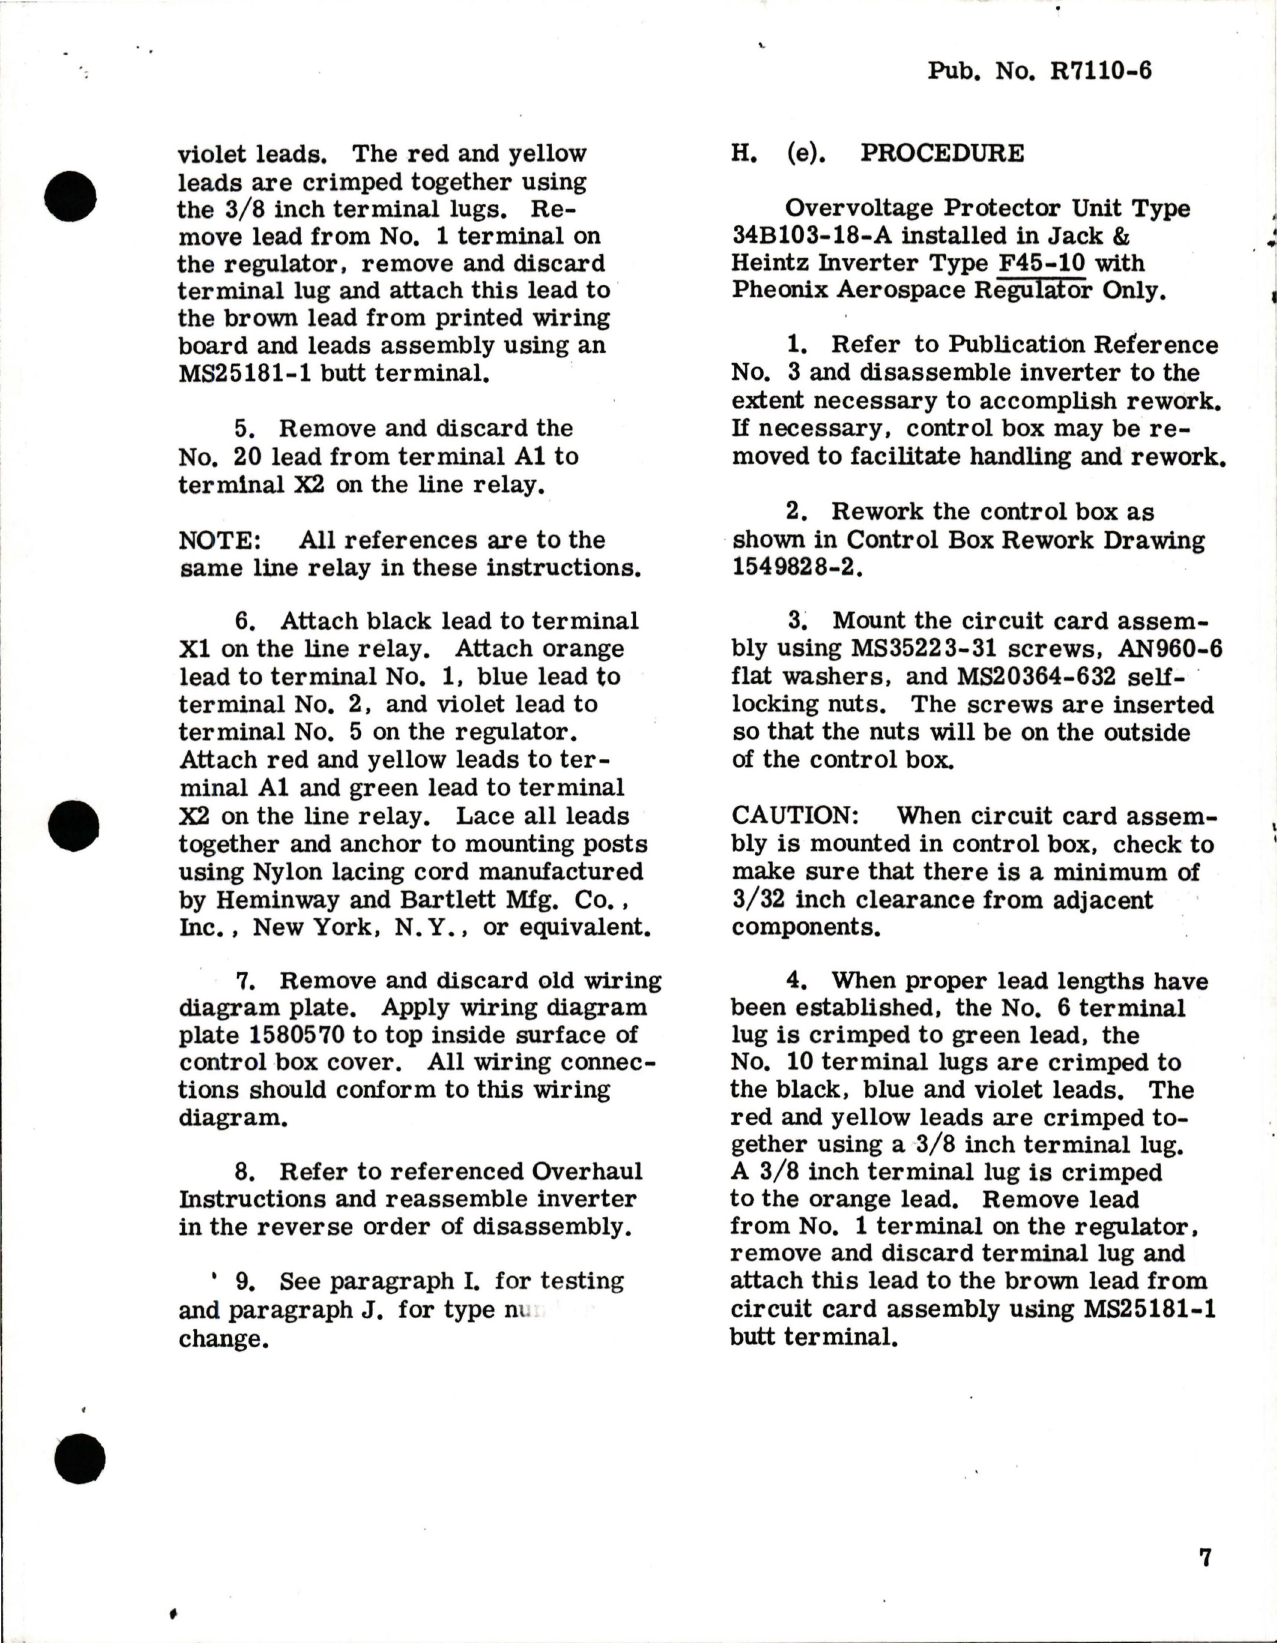 Sample page 7 from AirCorps Library document: Installation of Bendix Types 34B103-1A, 34B103-2-A, 34B103-3-A, 34B103-4-A, and 34B103-18-A Overvoltage Protector Unit for Electric Power Inverter